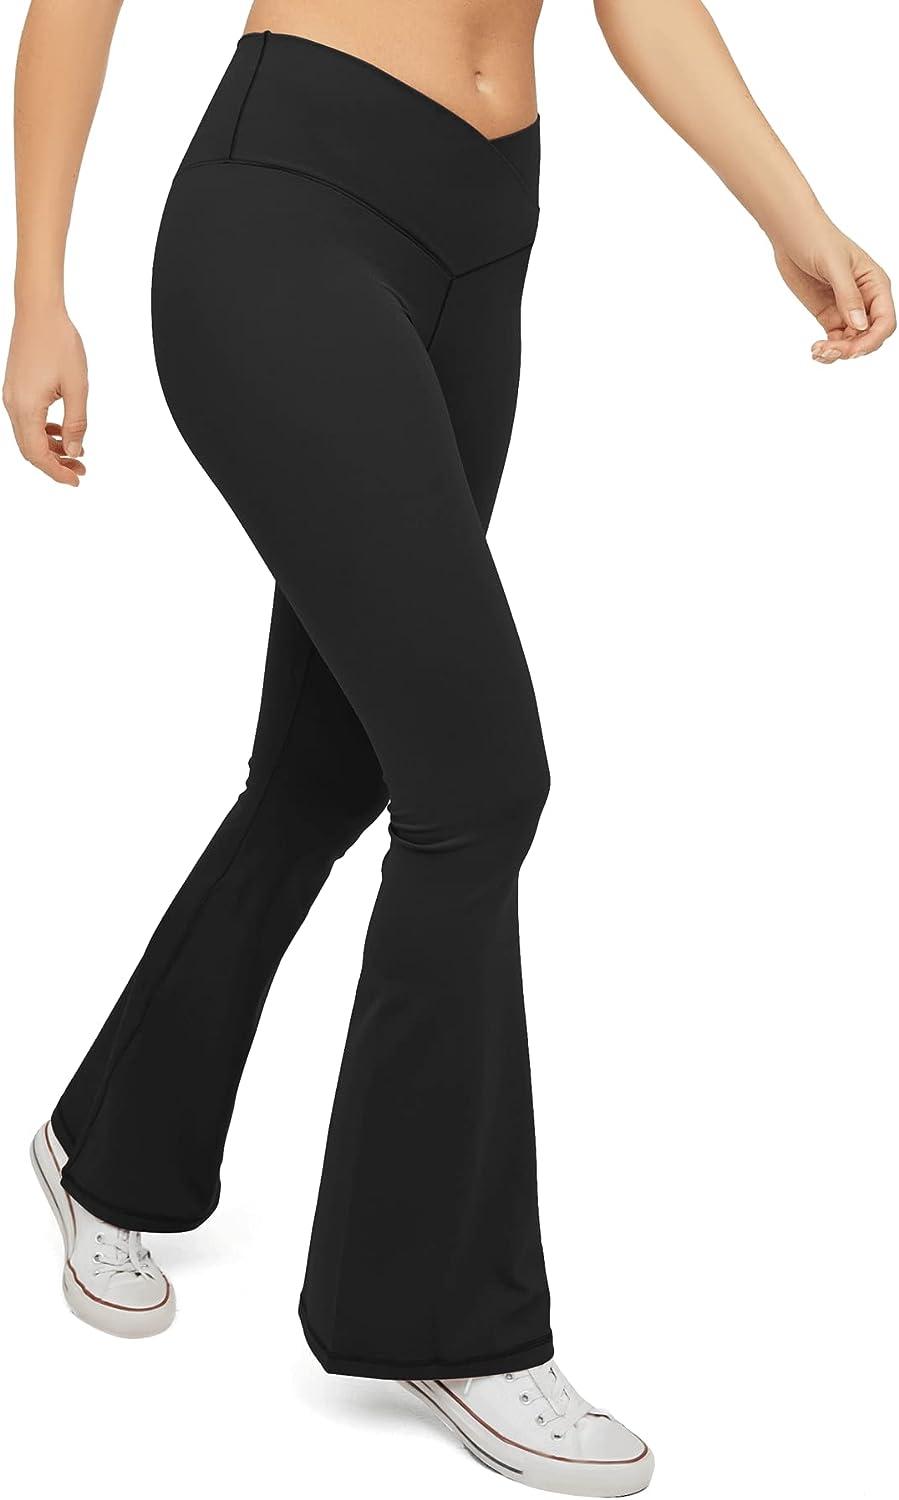 Activewear High Waisted Black Color Leopard Print Yoga Pants with Side  Pockets - Its All Leggings